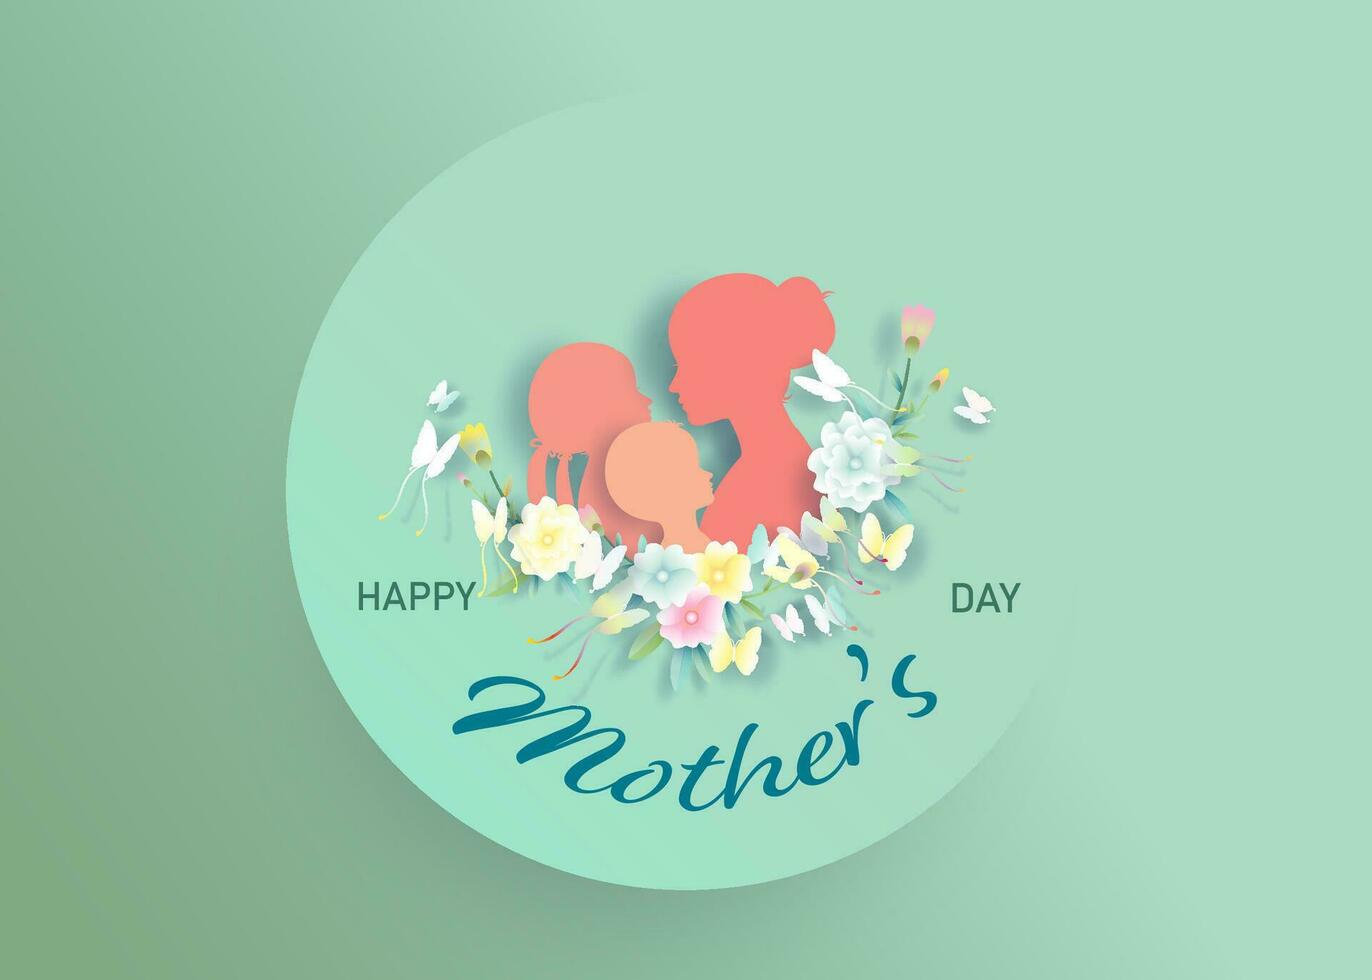 Happy Mother's Day with women, children and butterfly and flowers. vector